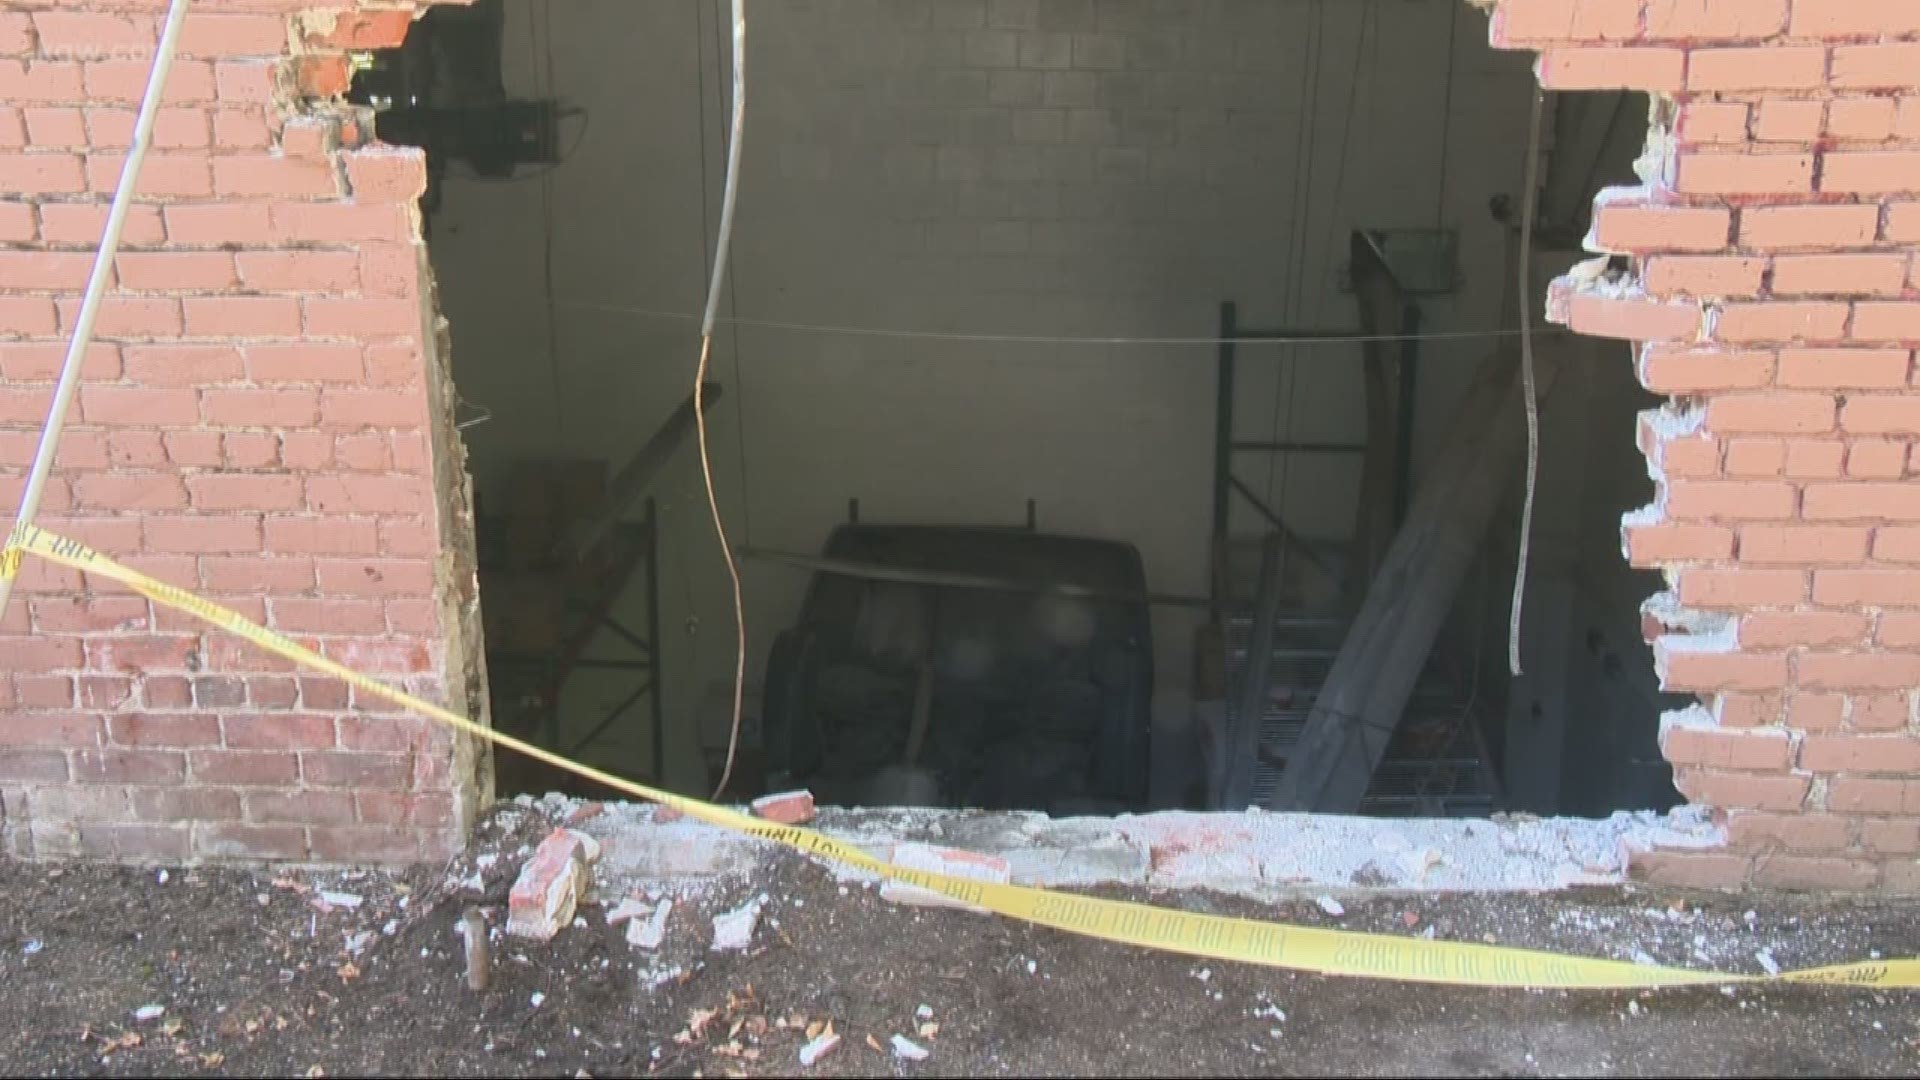 A car crashed into a building in Southwest Portland's Goose Hollow neighborhood. The car went through a wall and came to rest upside down a floor below.